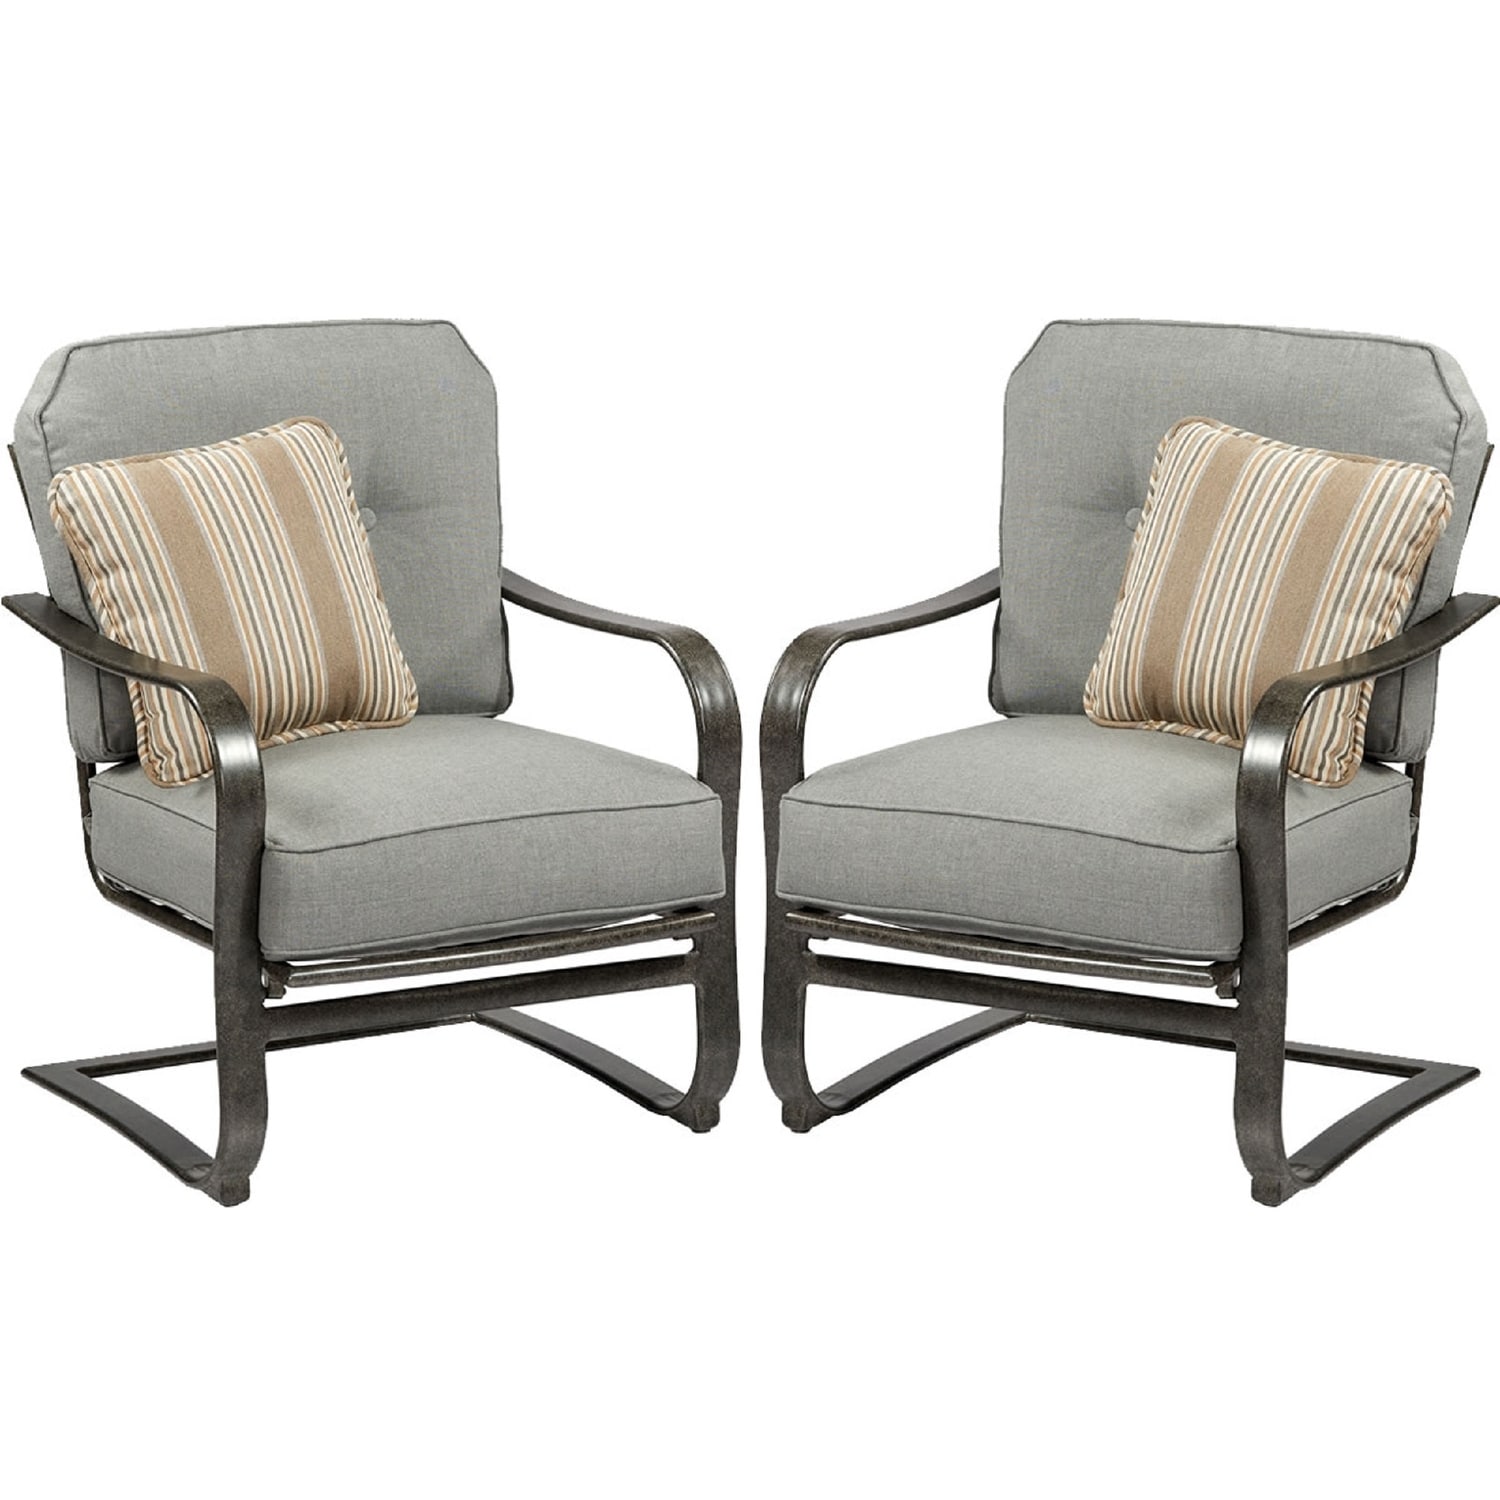 Agio Madison C Spring Chair Set Of 2 With Cushion